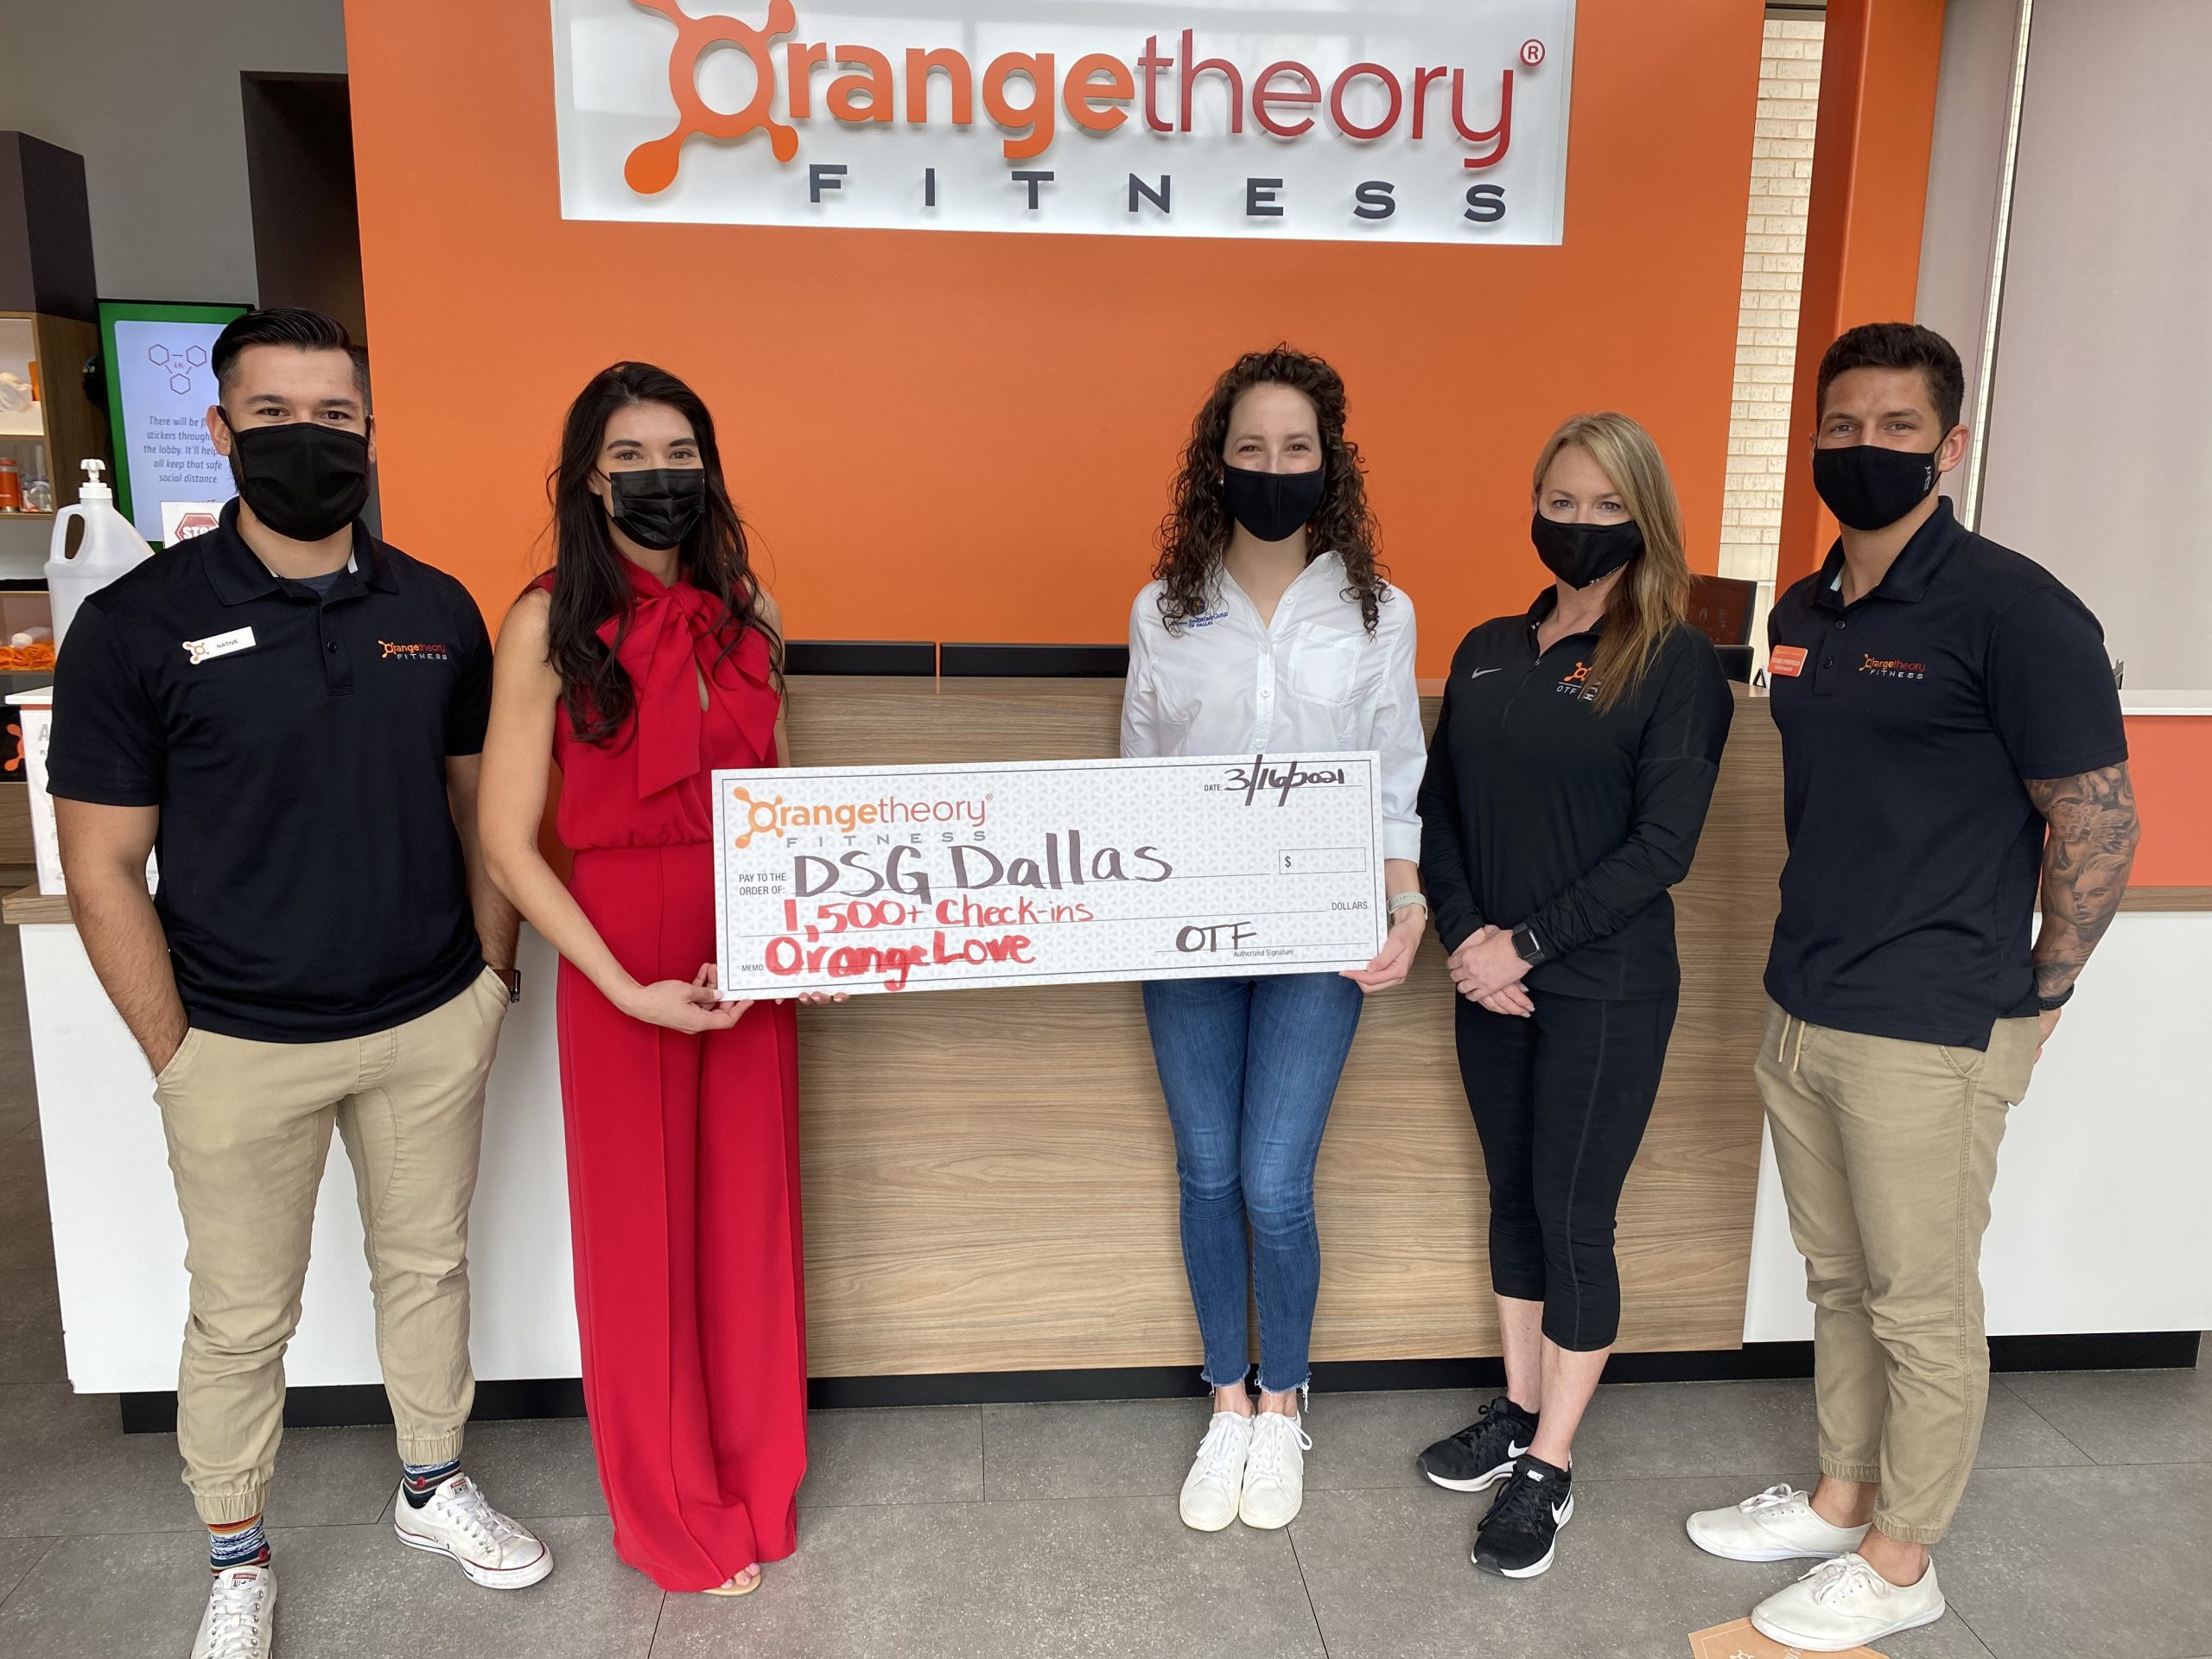 Orangetheory Fitness Leander - We're SO excited about the new OTBeat BURN!  The newest heart rate monitor tracks calories, steps, distance AND heart  rate! It stores 3 days worth of data and